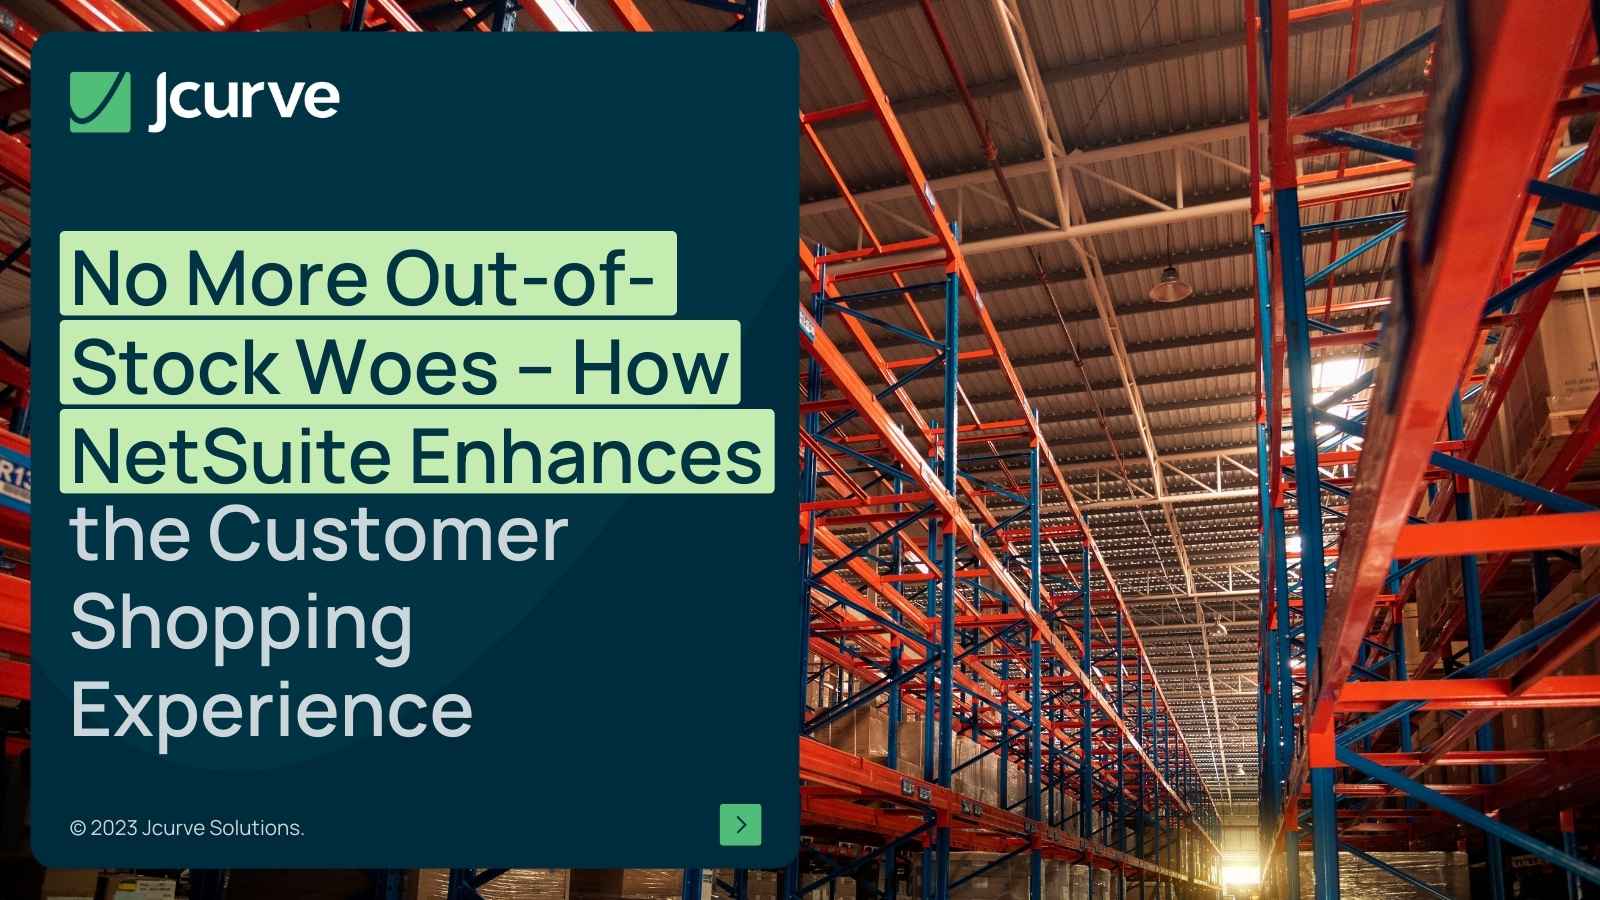 No More Out-of-Stock Woes – How NetSuite Enhances the Customer Shopping Experience